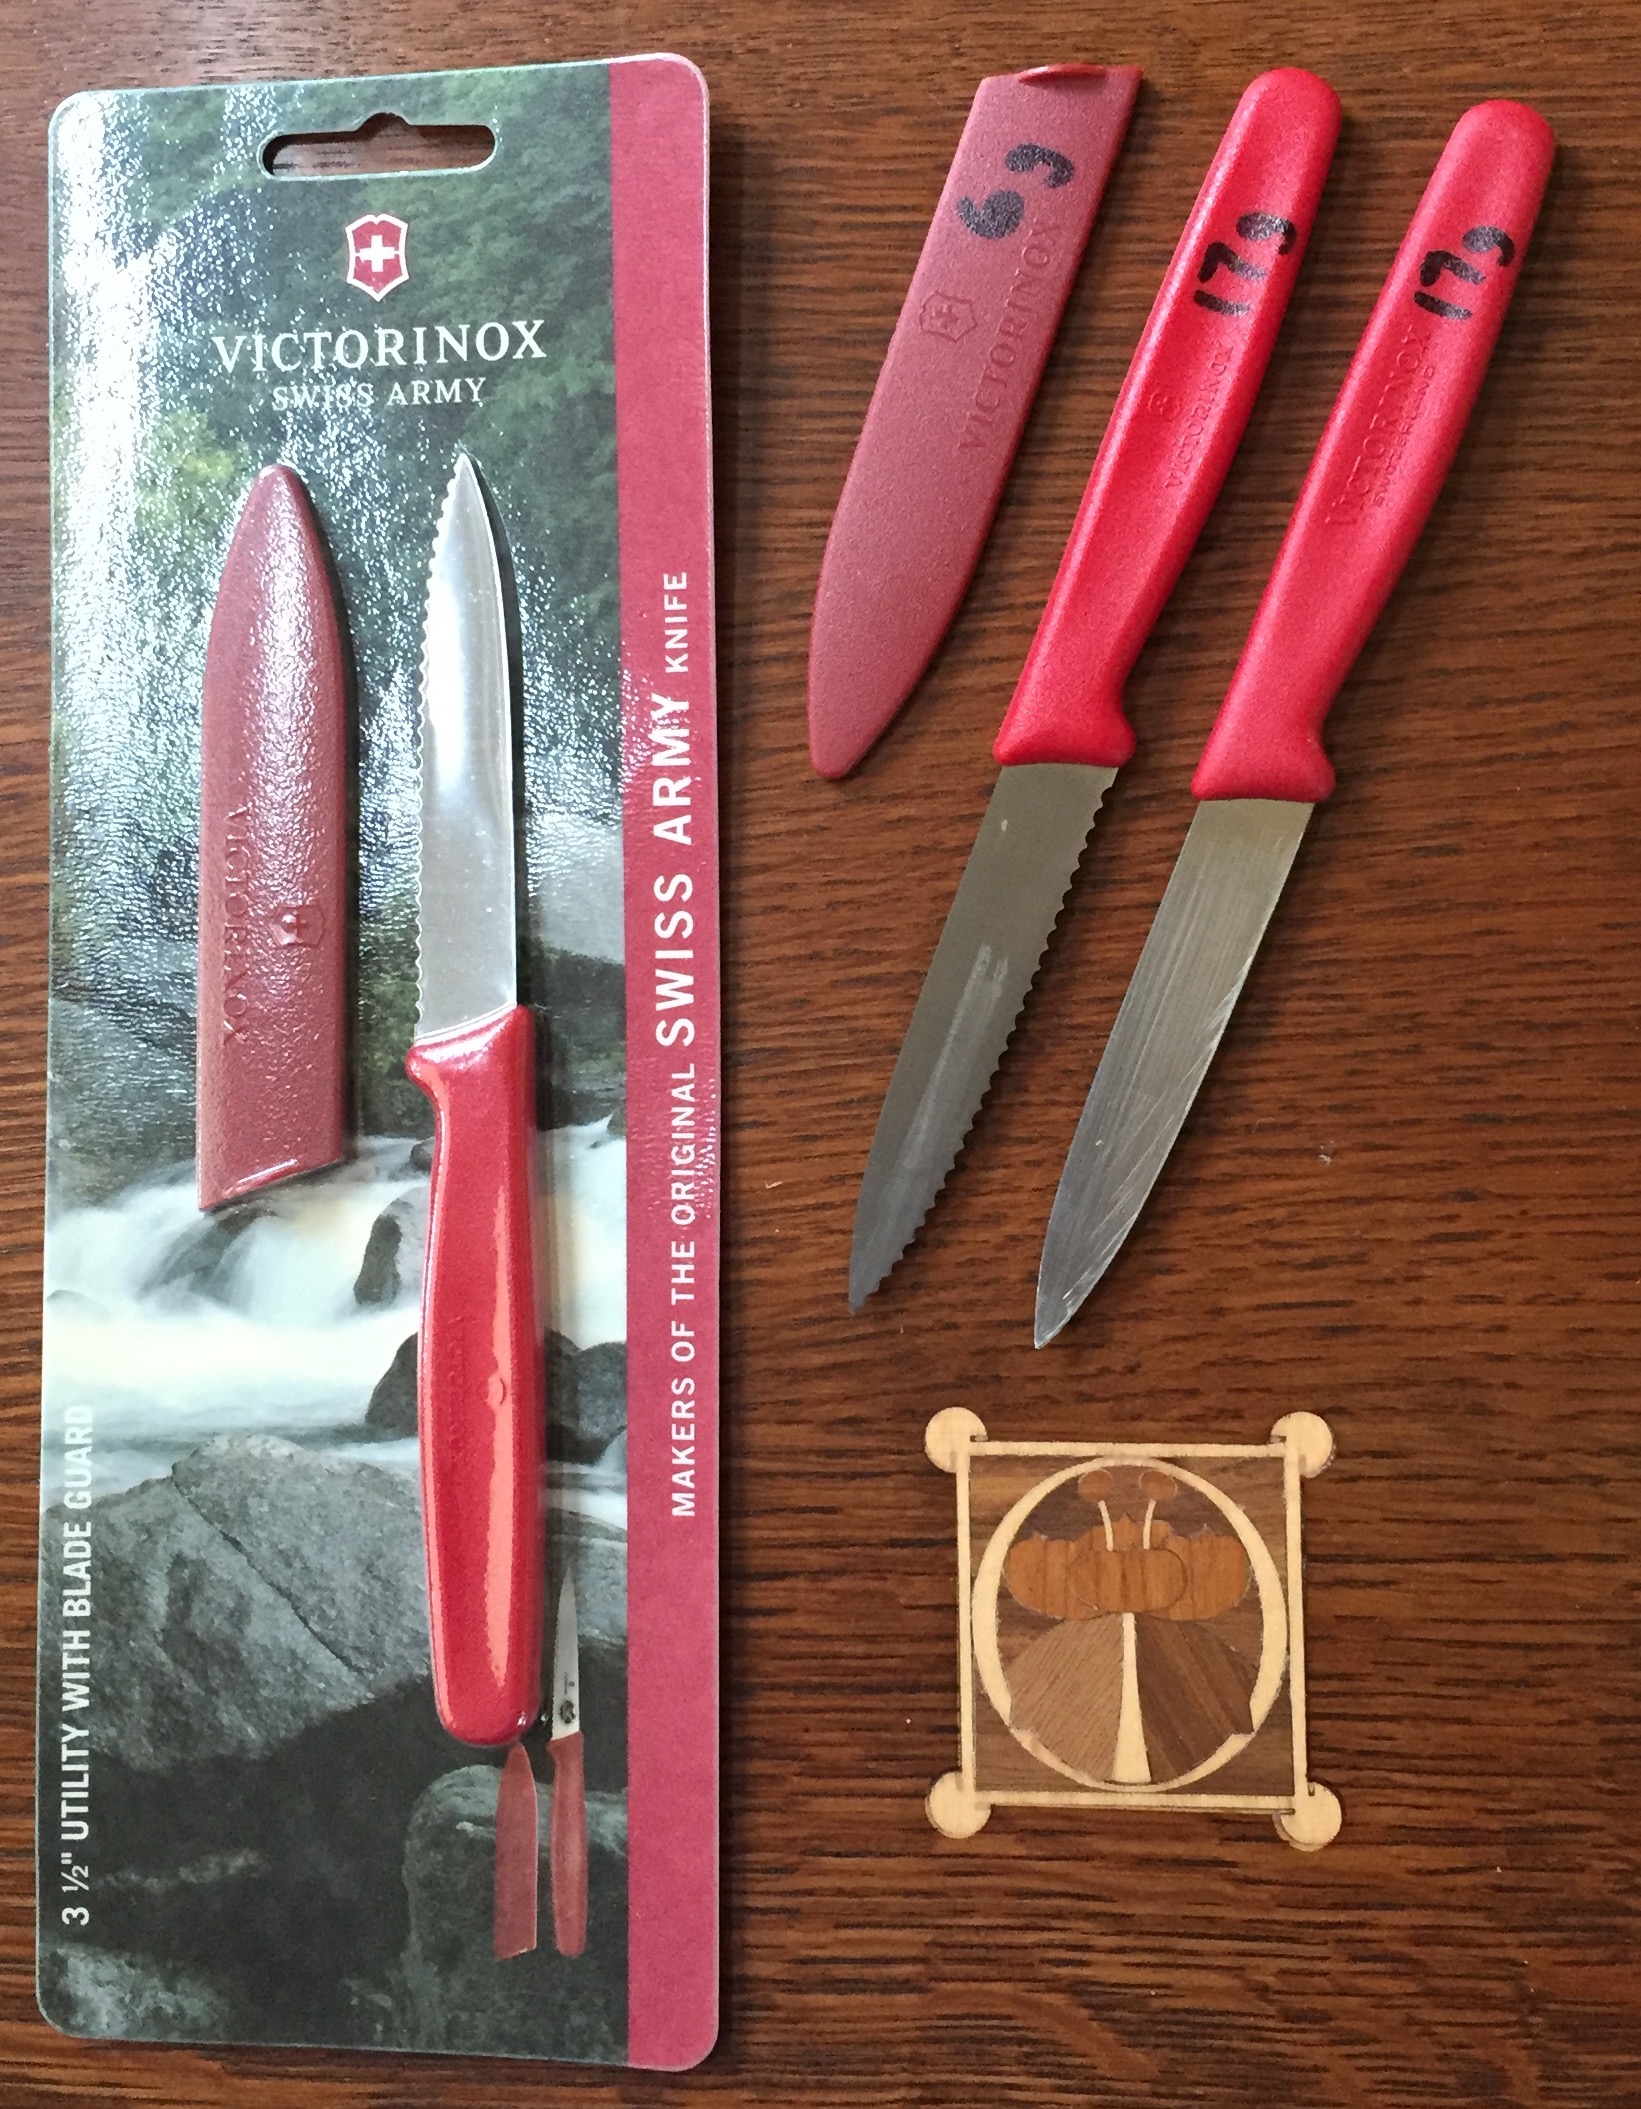 In Praise of the Little Vicky paring knife - Backpacking Light